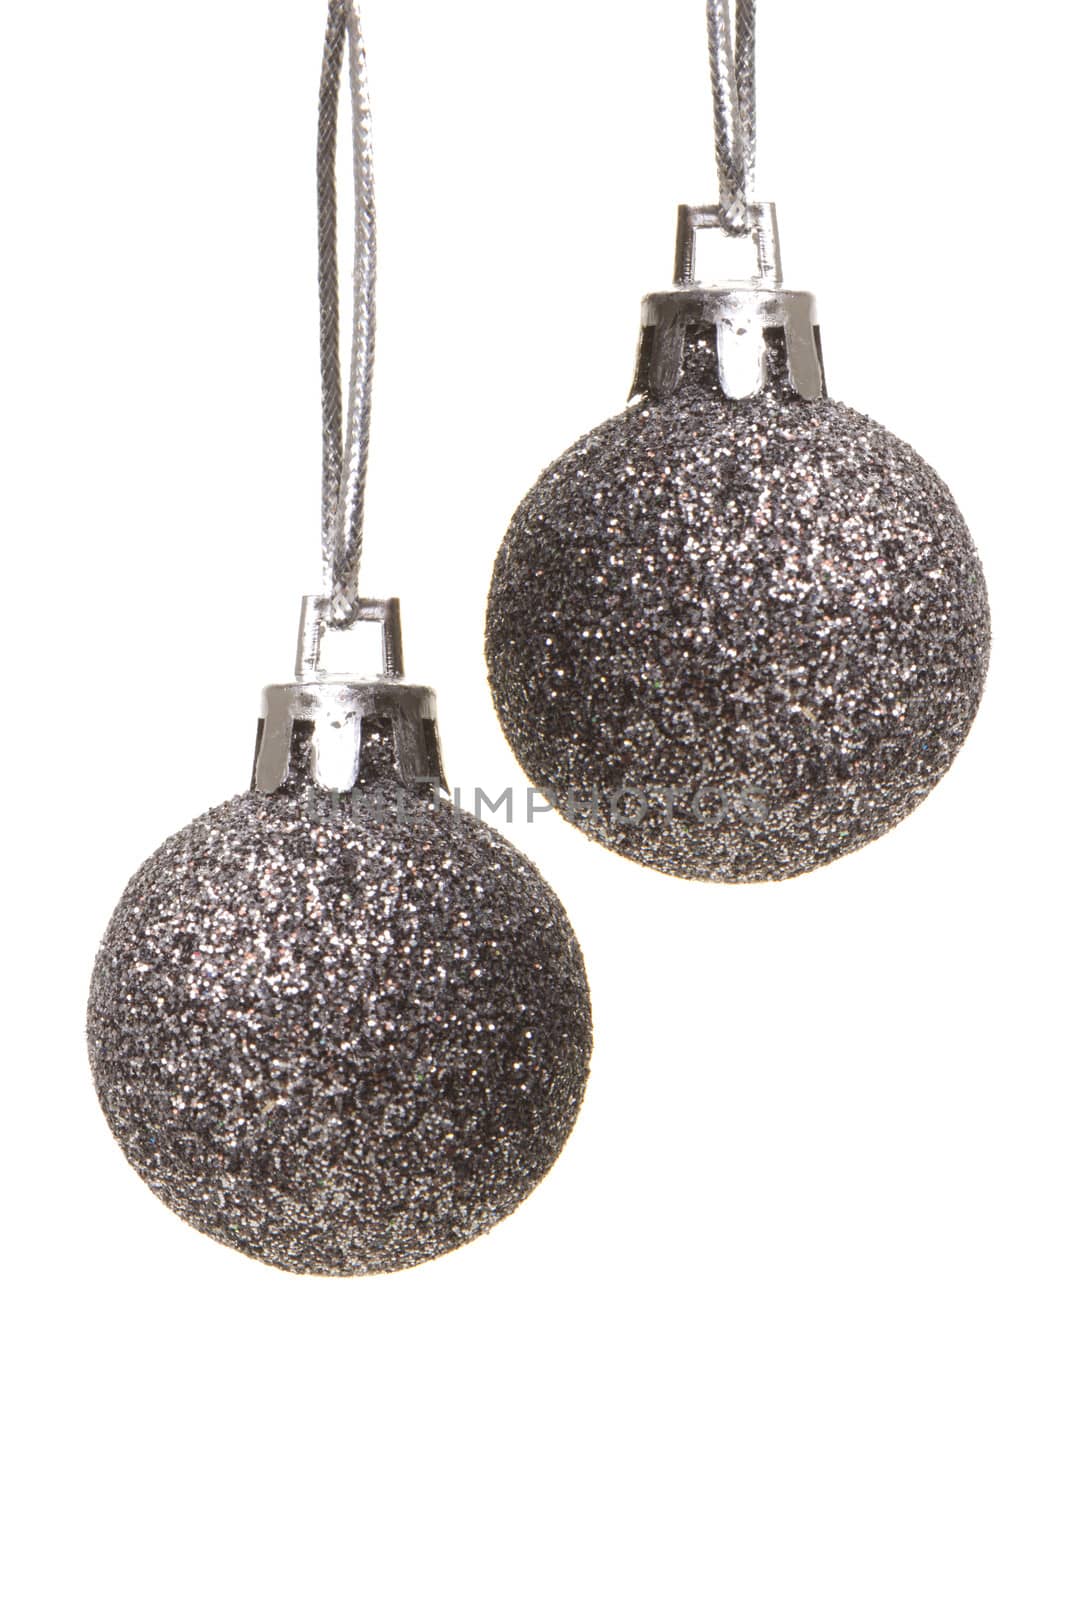 silver, gray christmas balls isolated hanging with white background 